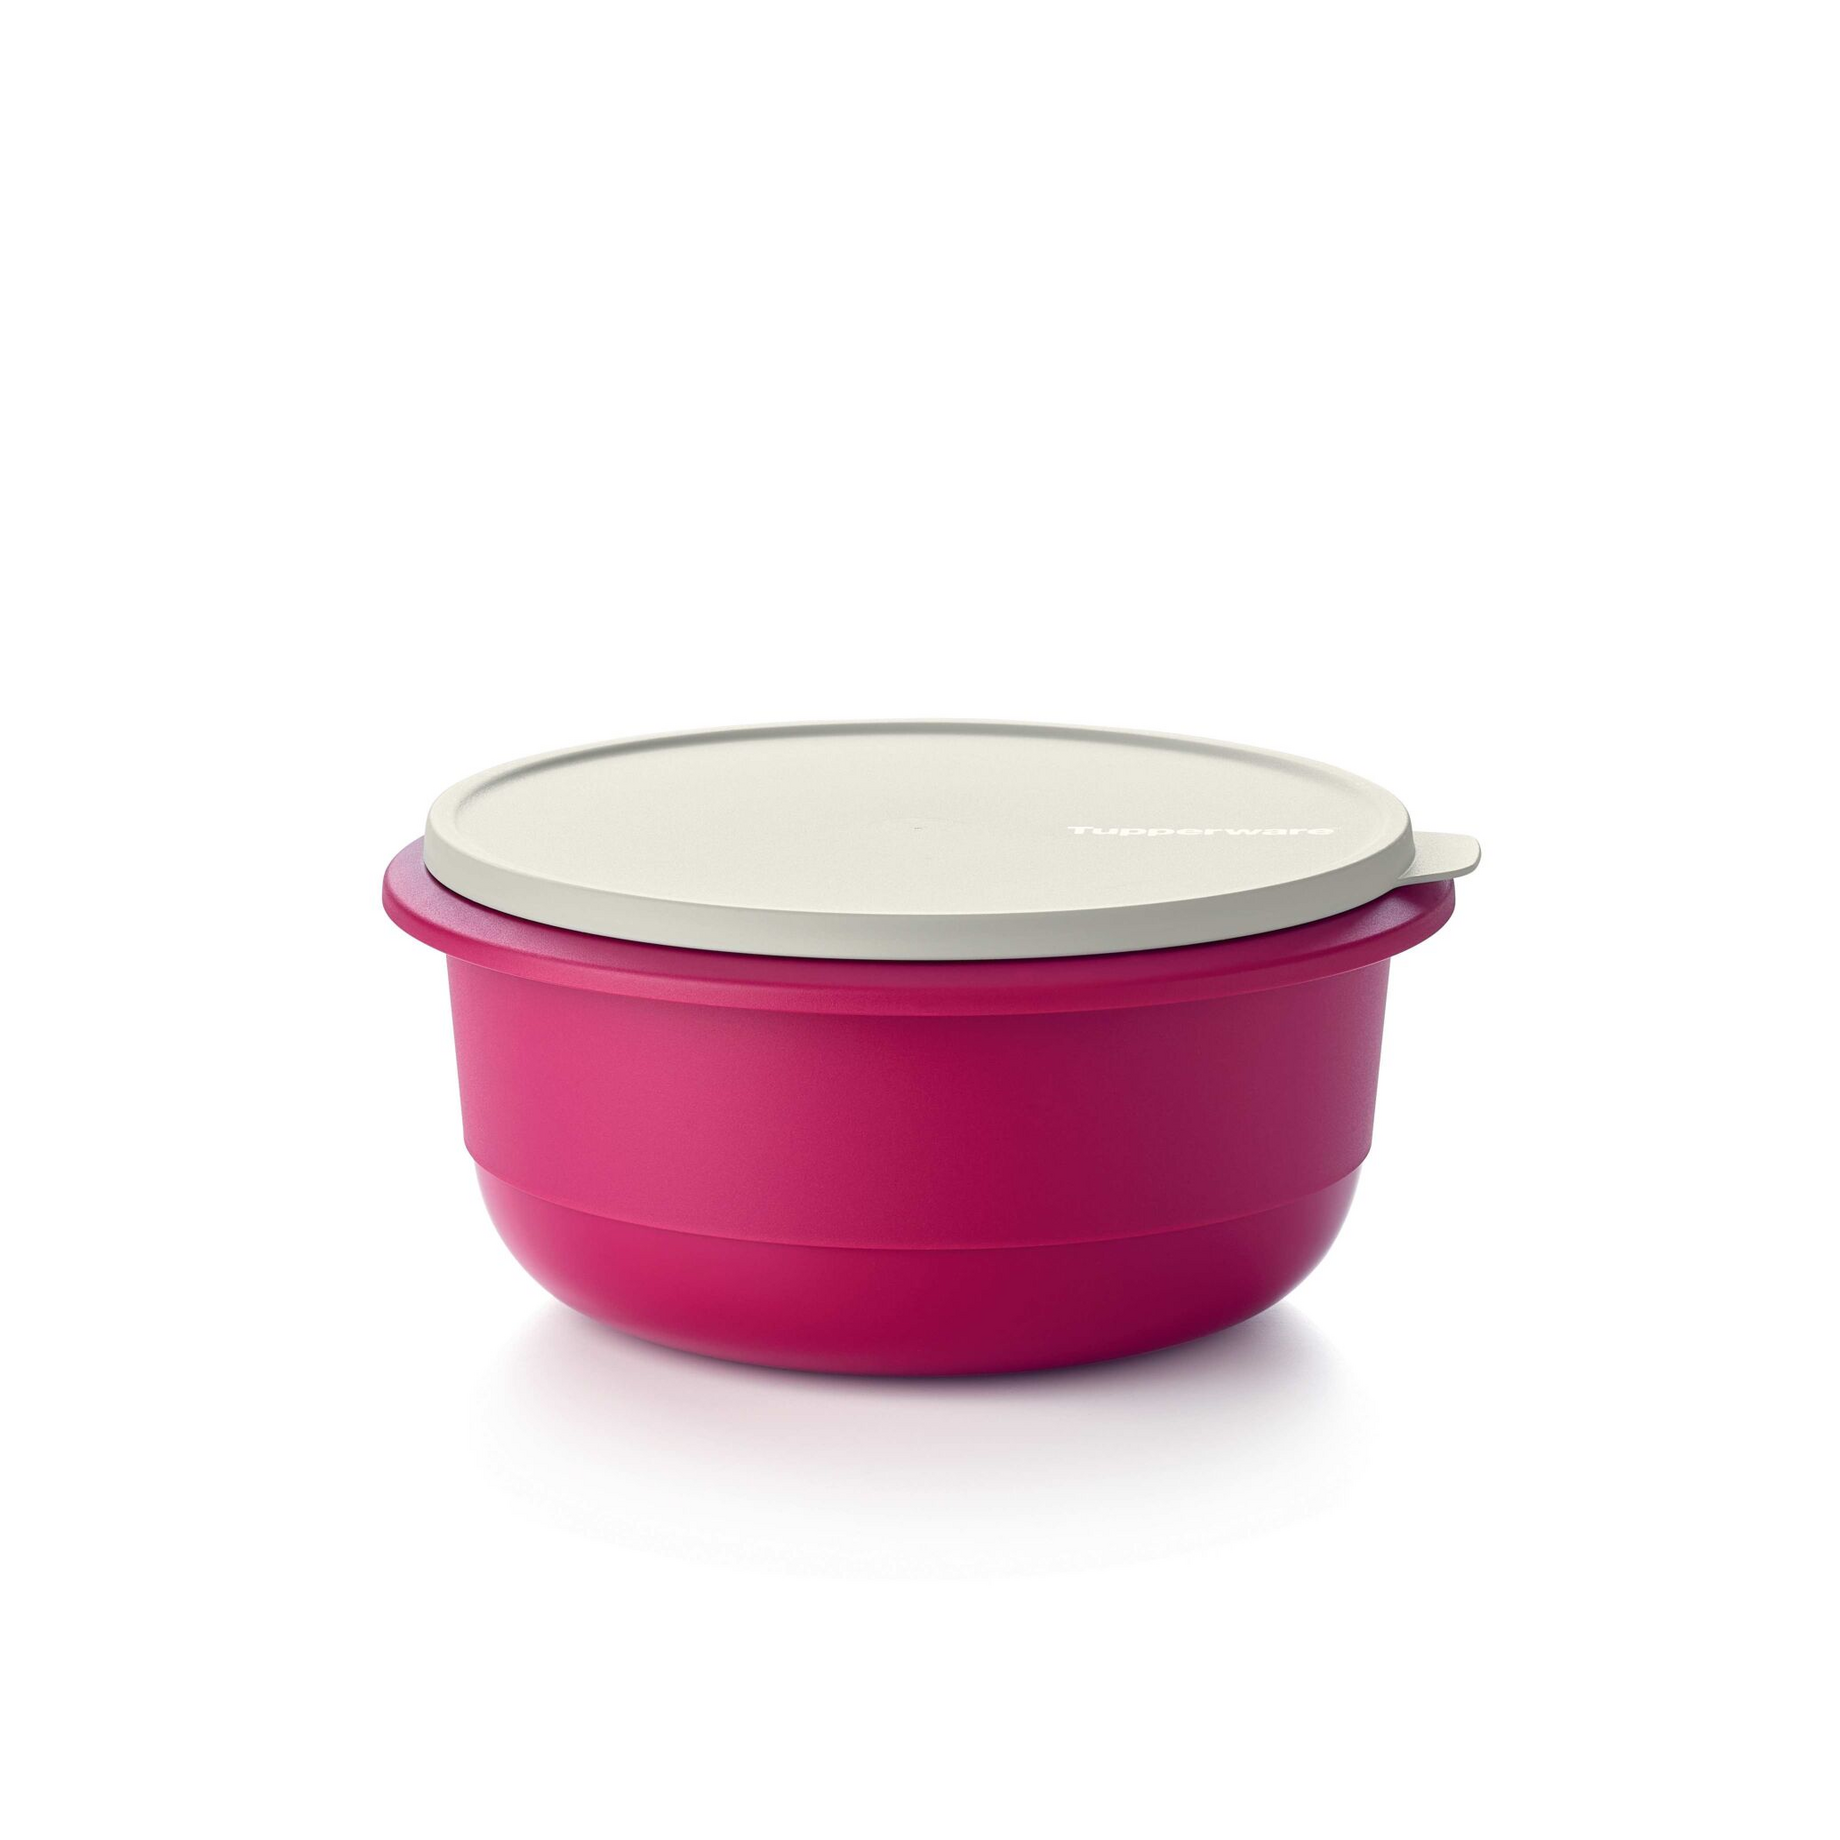 https://appng.tupperware.eu/service/appng/tupperware-products/rest/autoCrop/388485/1840/x